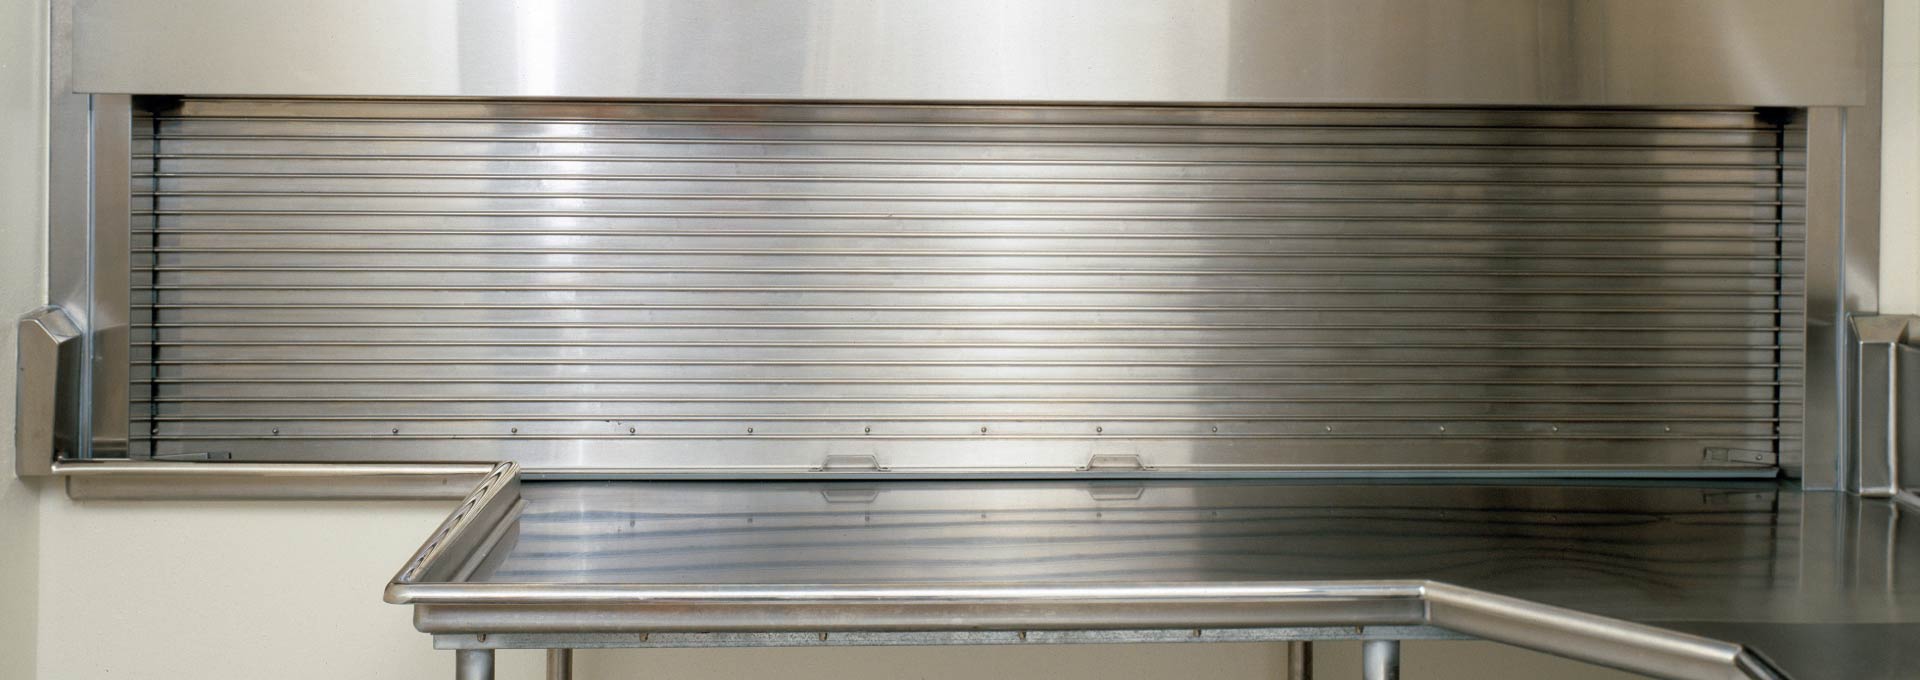 Comprehensive system of counter doors encompasses three basic types -- metal curtain, wood curtain and integral frame and sill